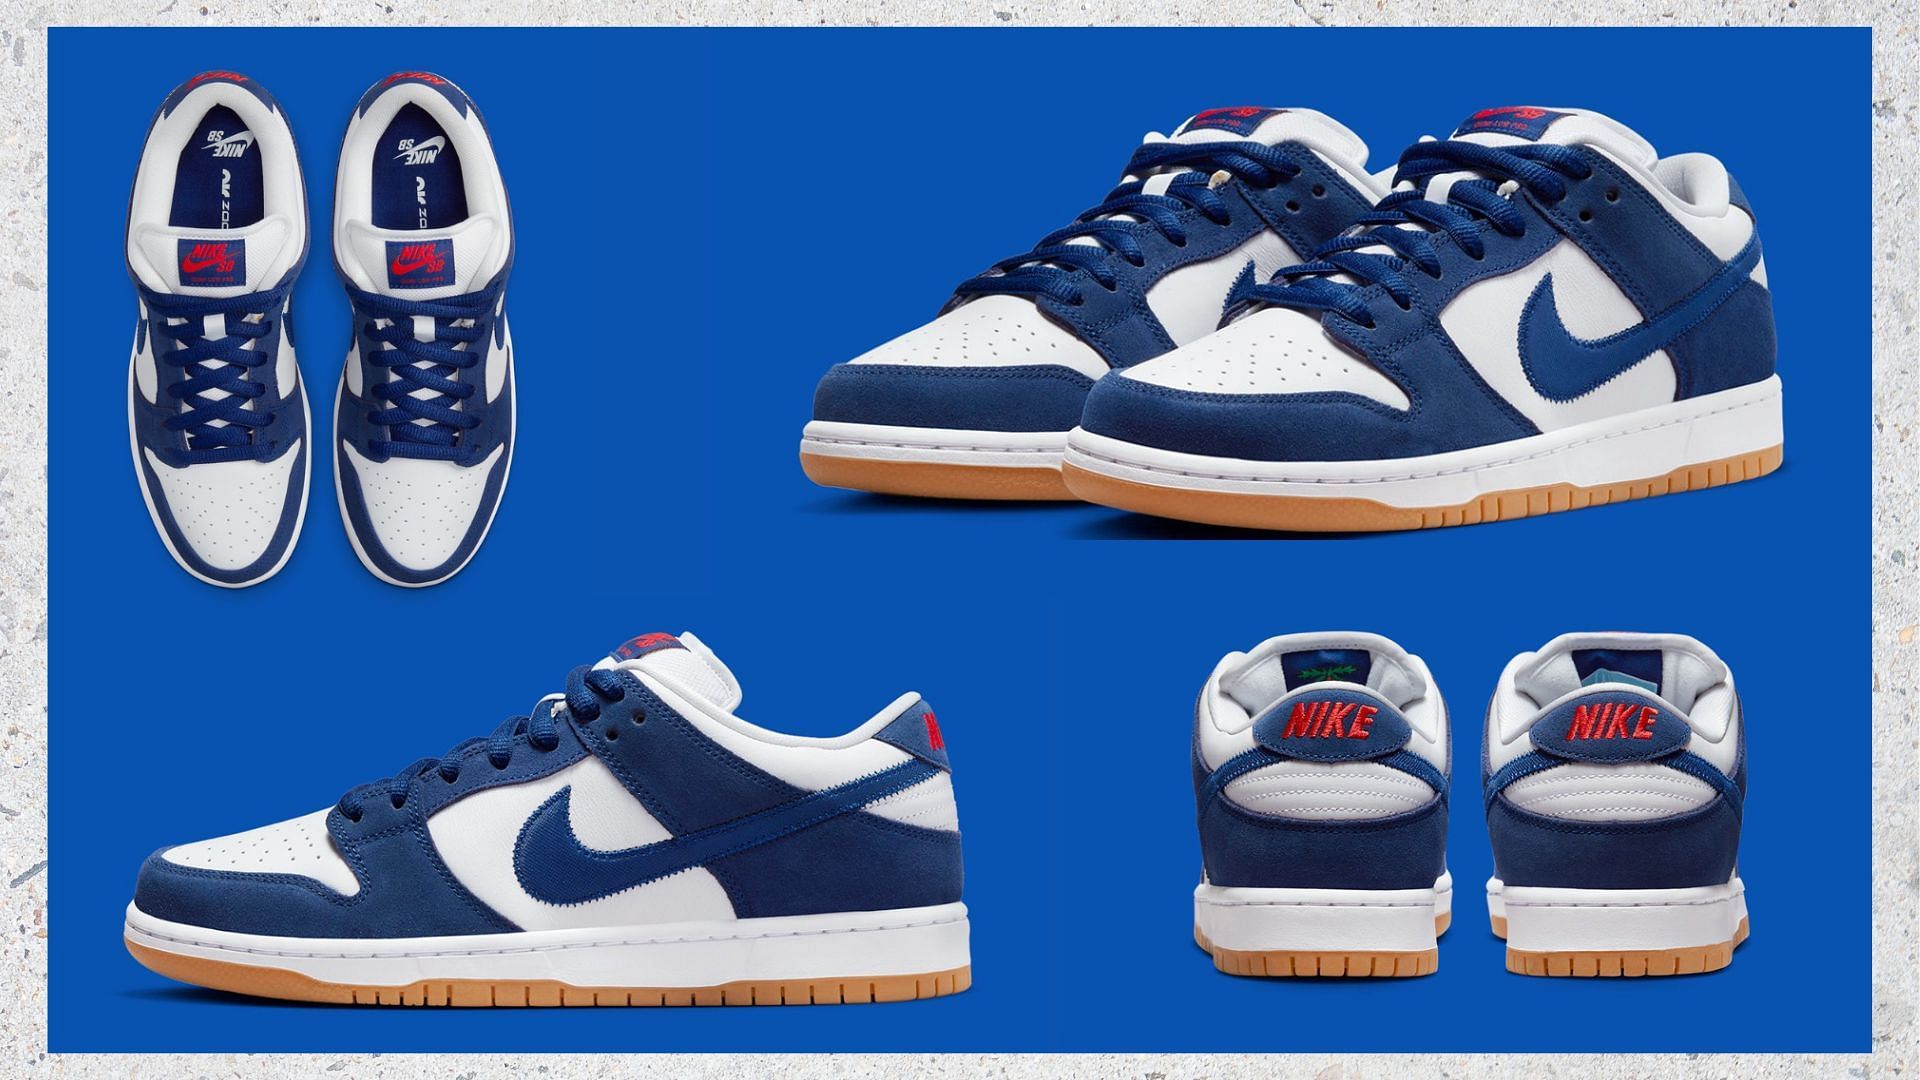 Where to buy Nike SB Dunk Low Dodgers shoes? Price and more details explored